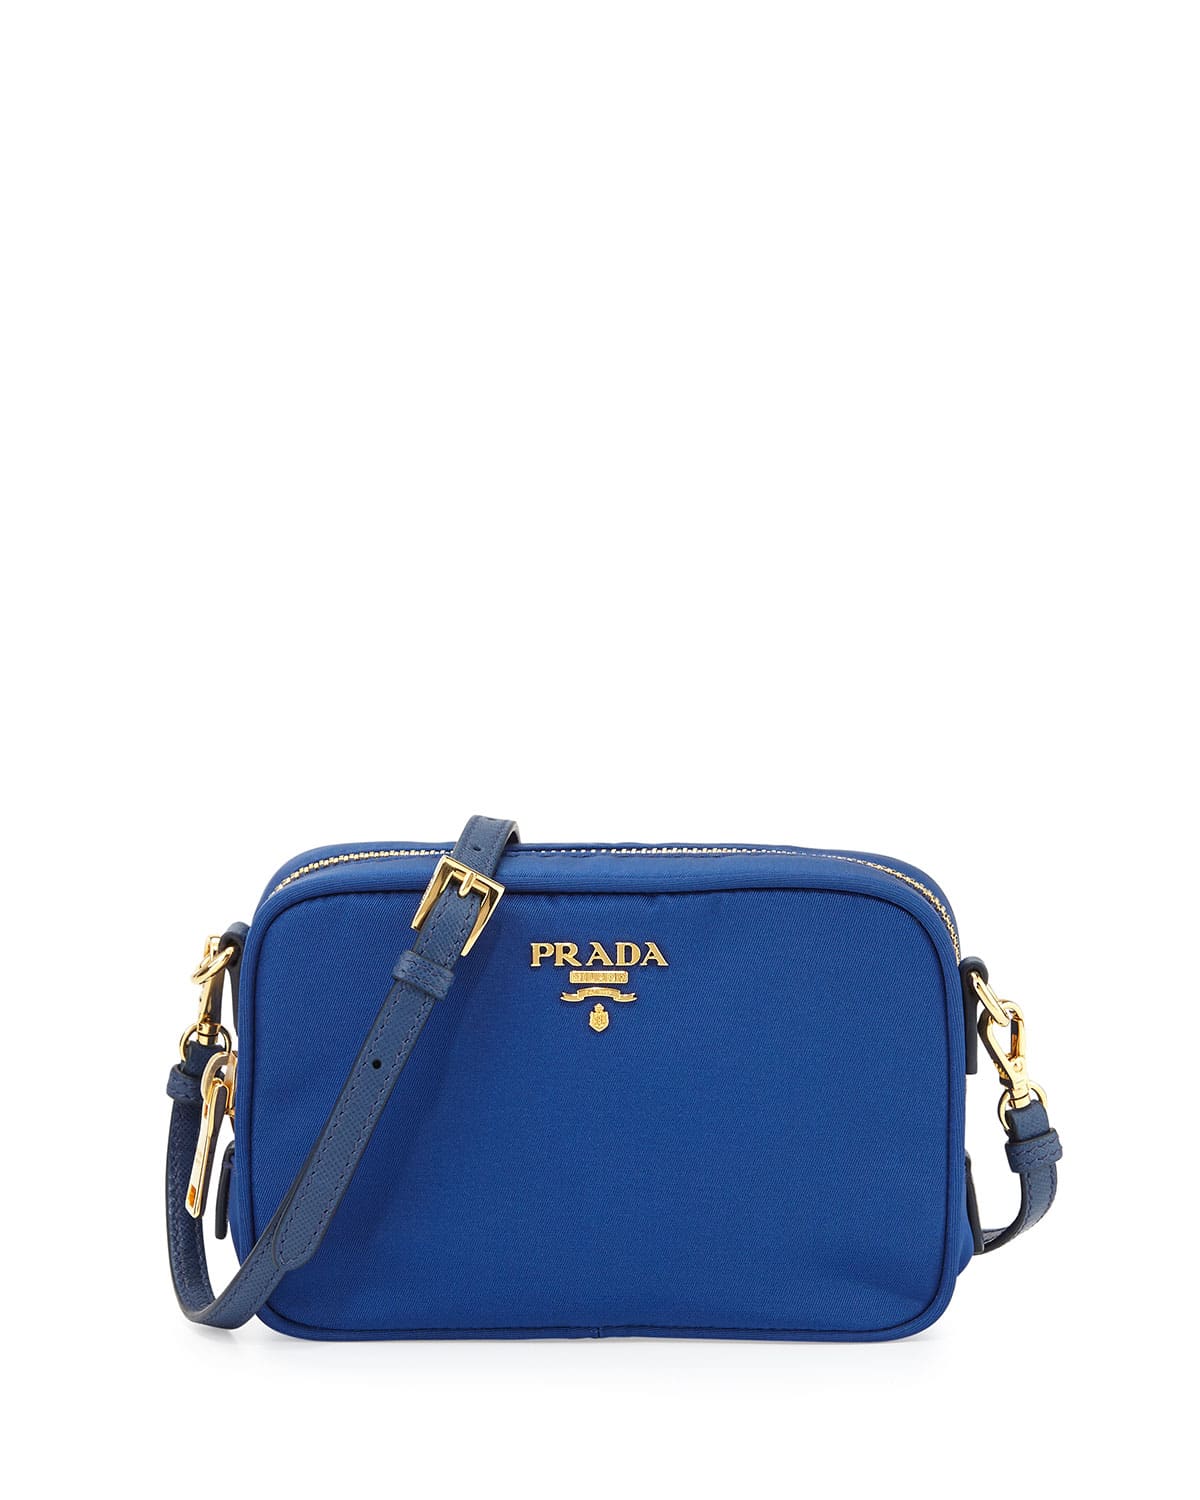 Prada Pre-Fall 2014 Bag Collection featuring new Double Totes in Suede ...